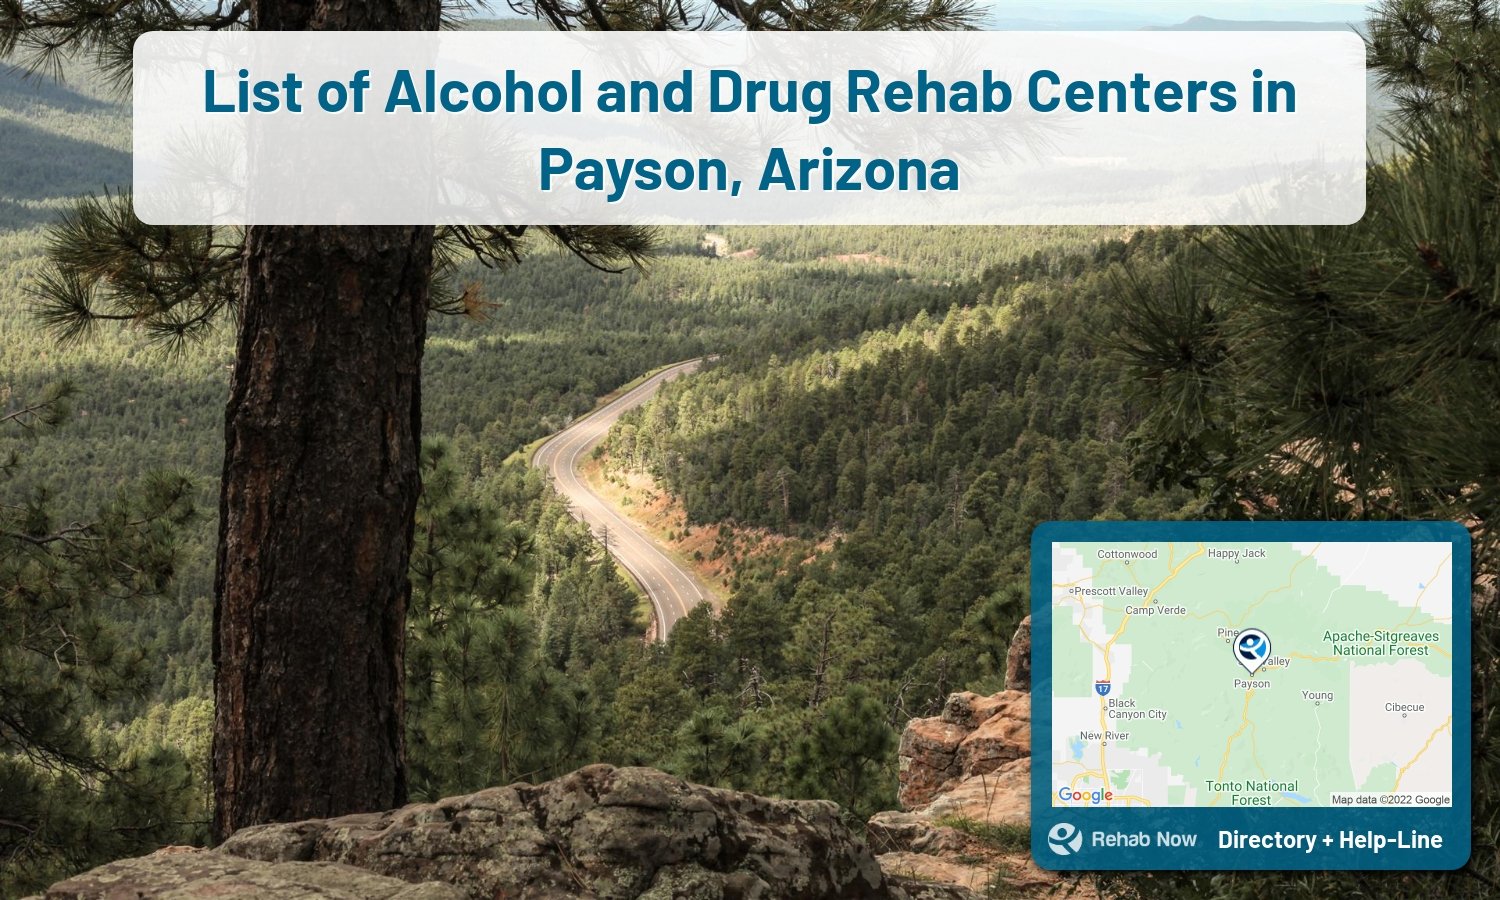 Payson, AZ Treatment Centers. Find drug rehab in Payson, Arizona, or detox and treatment programs. Get the right help now!